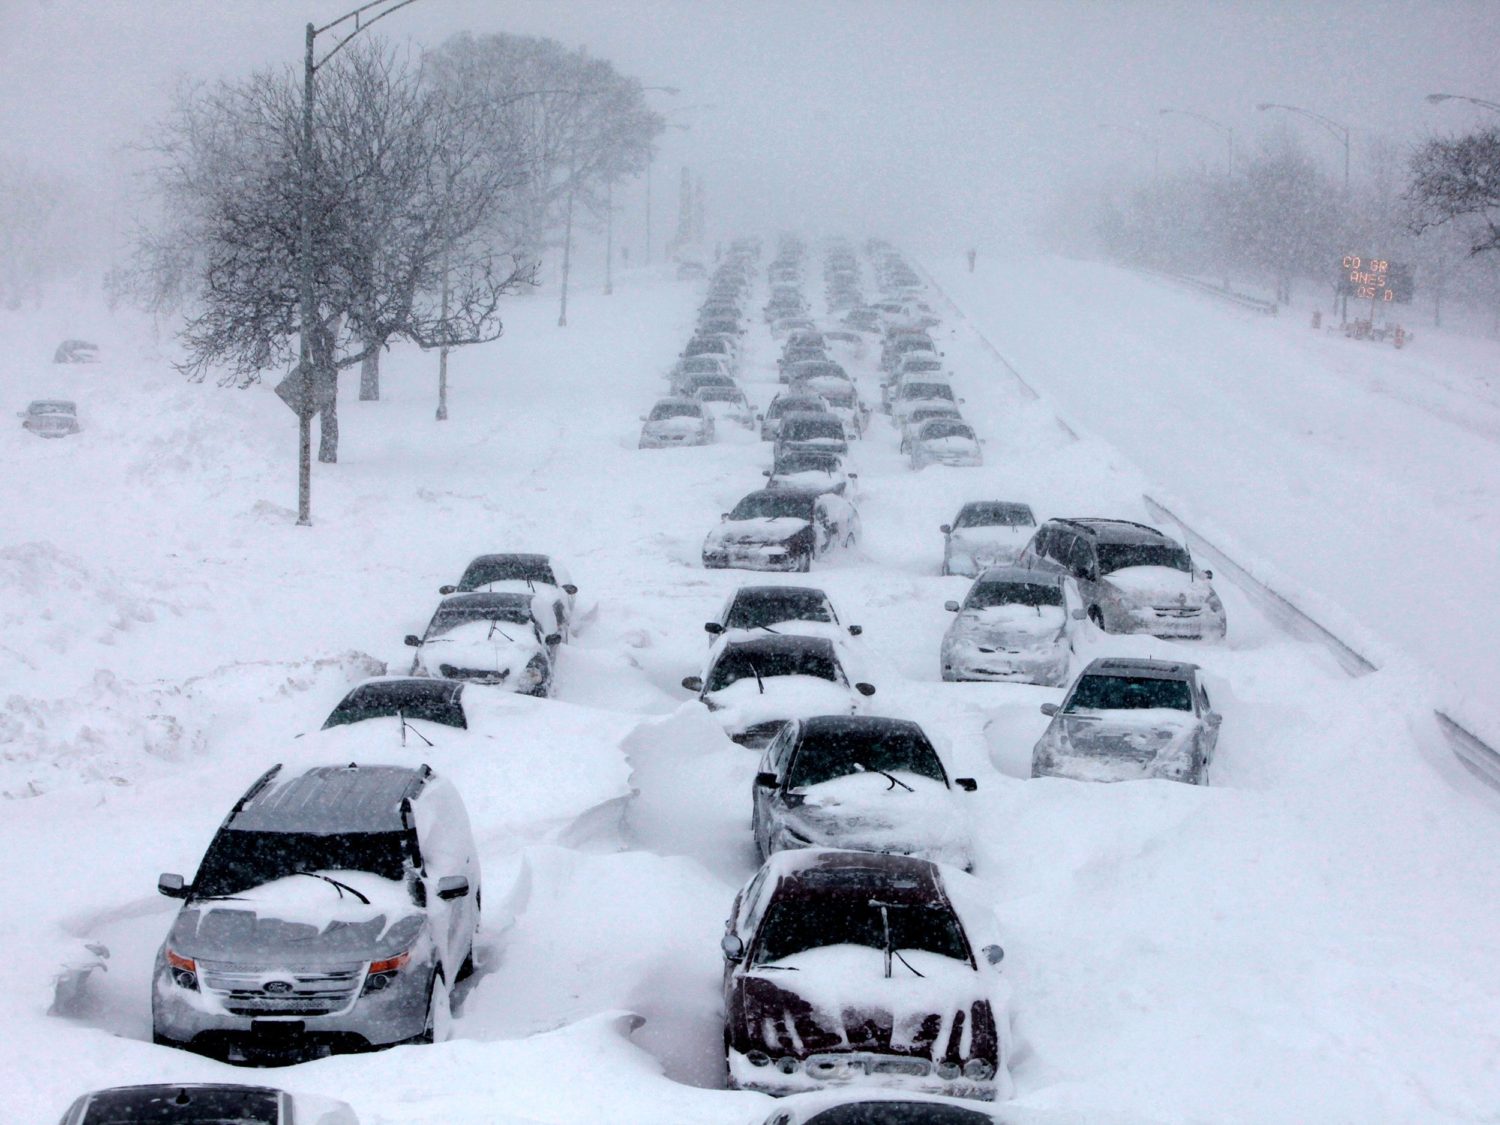 blizzard, snowstorm, weather, visibility, snow, winter, cars abandoned, highway